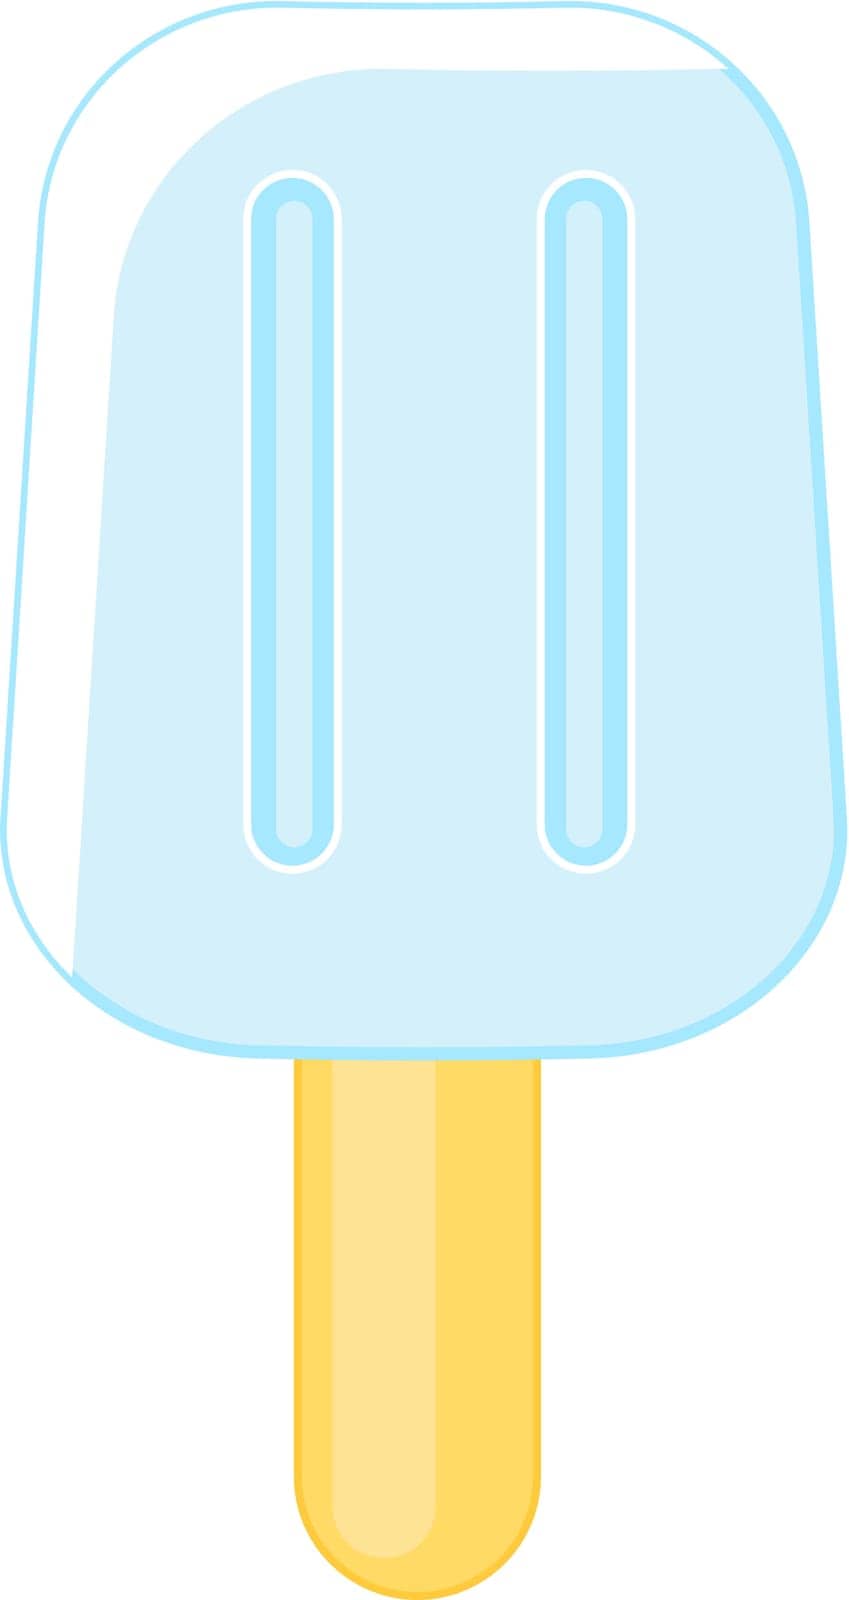 Frozen glazed popsicle on stick. Summer refreshing treat coated with milk chocolate. Summer vacation icon. Simple flat cartoon vector isolated on white background